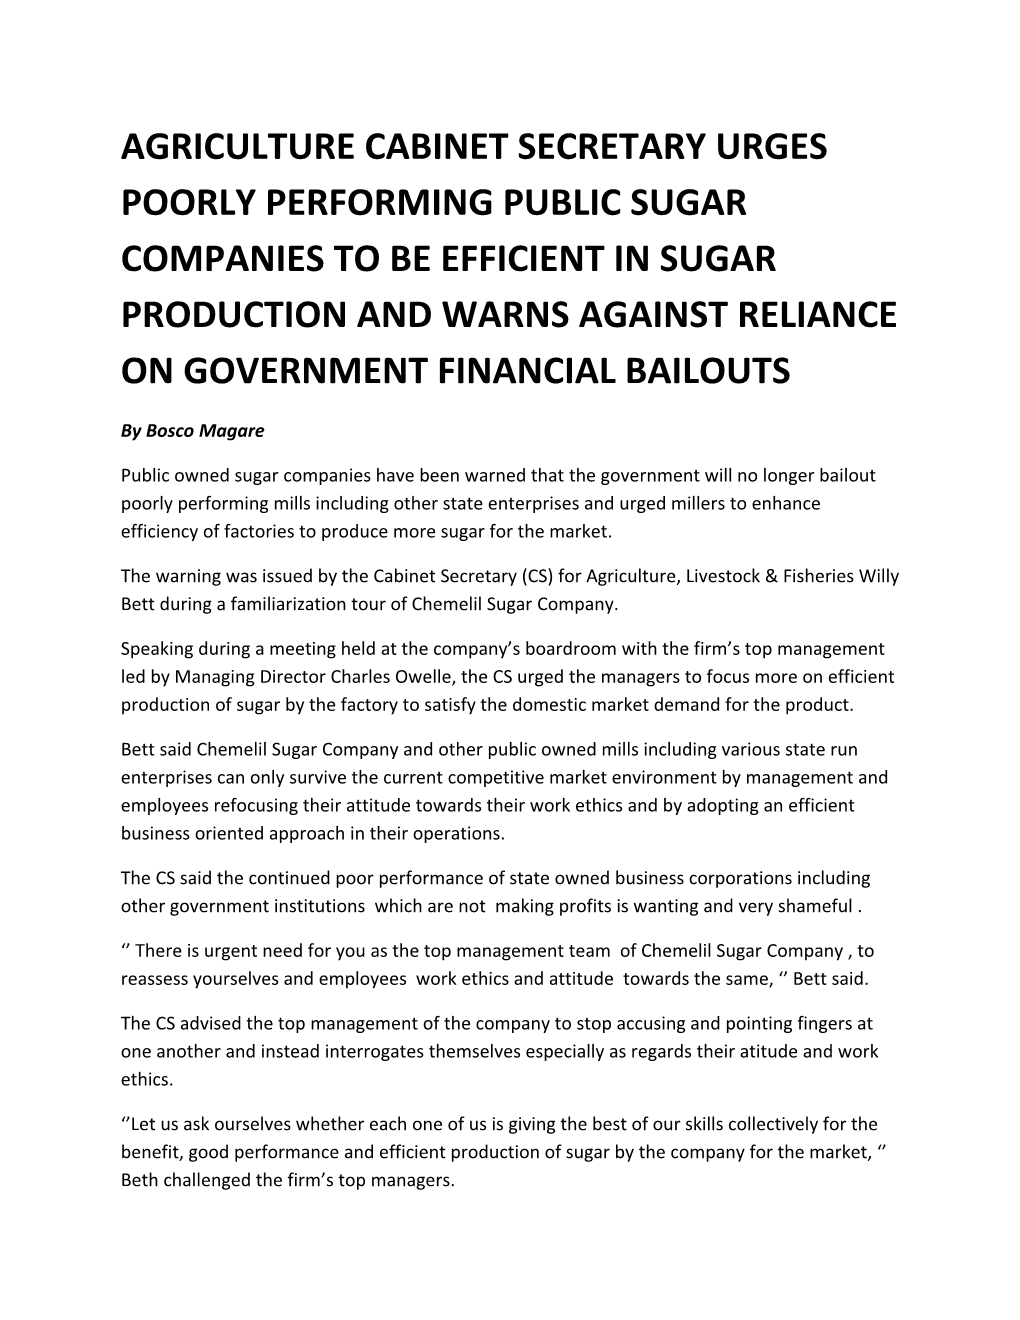 Agriculture Cabinet Secretary Urges Poorly Performing Public Sugar Companiesto Be Efficient